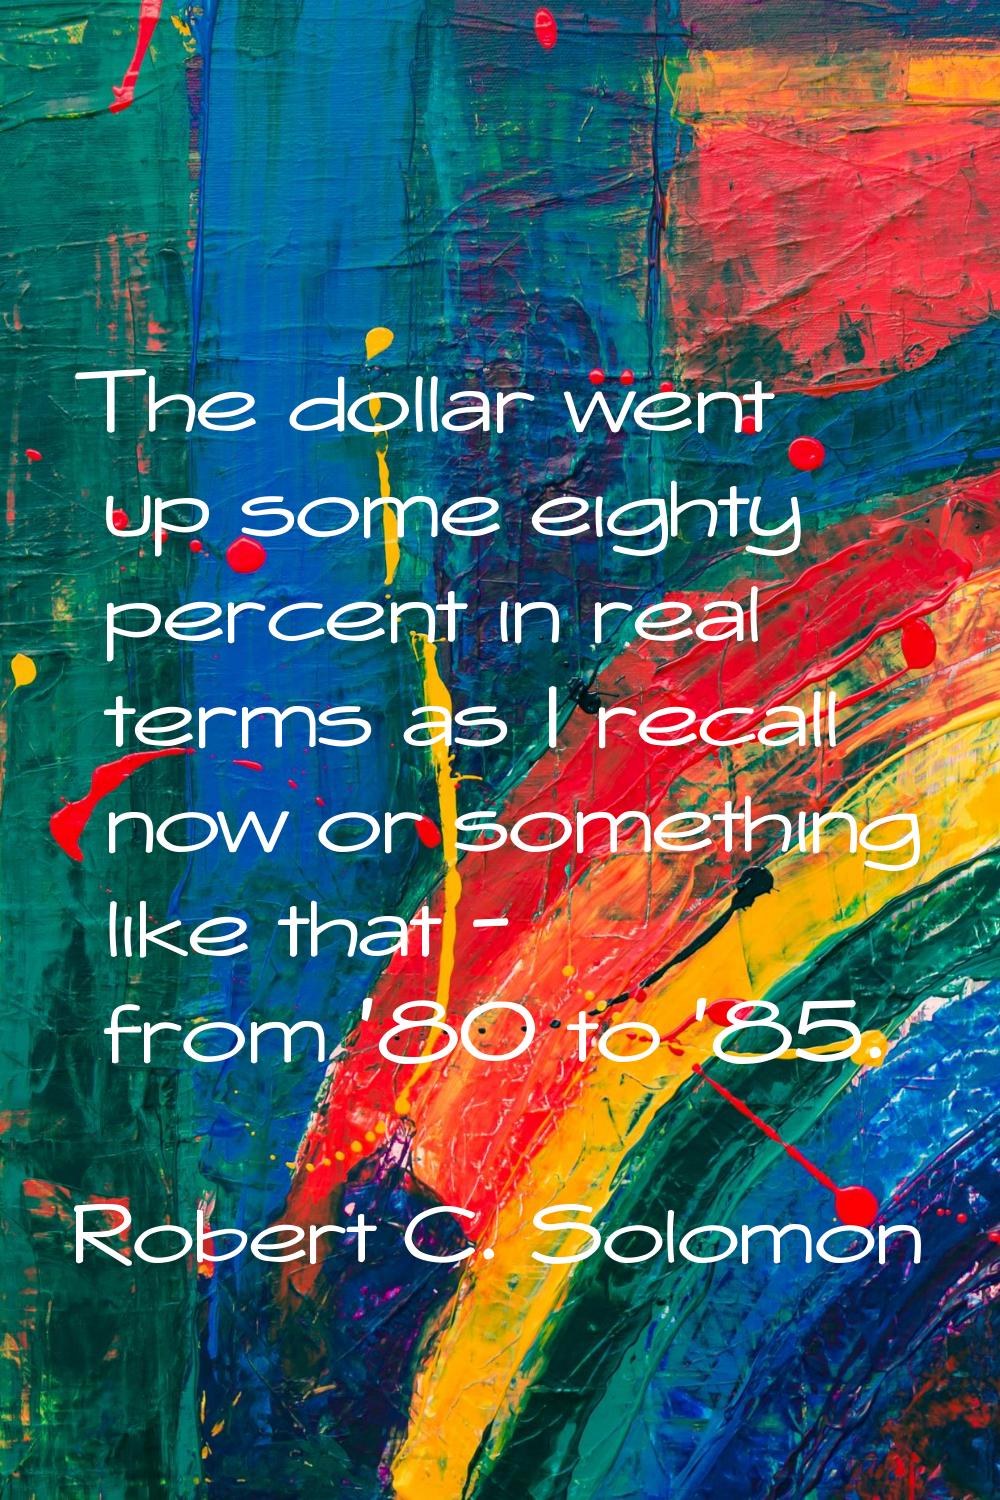 The dollar went up some eighty percent in real terms as I recall now or something like that - from 